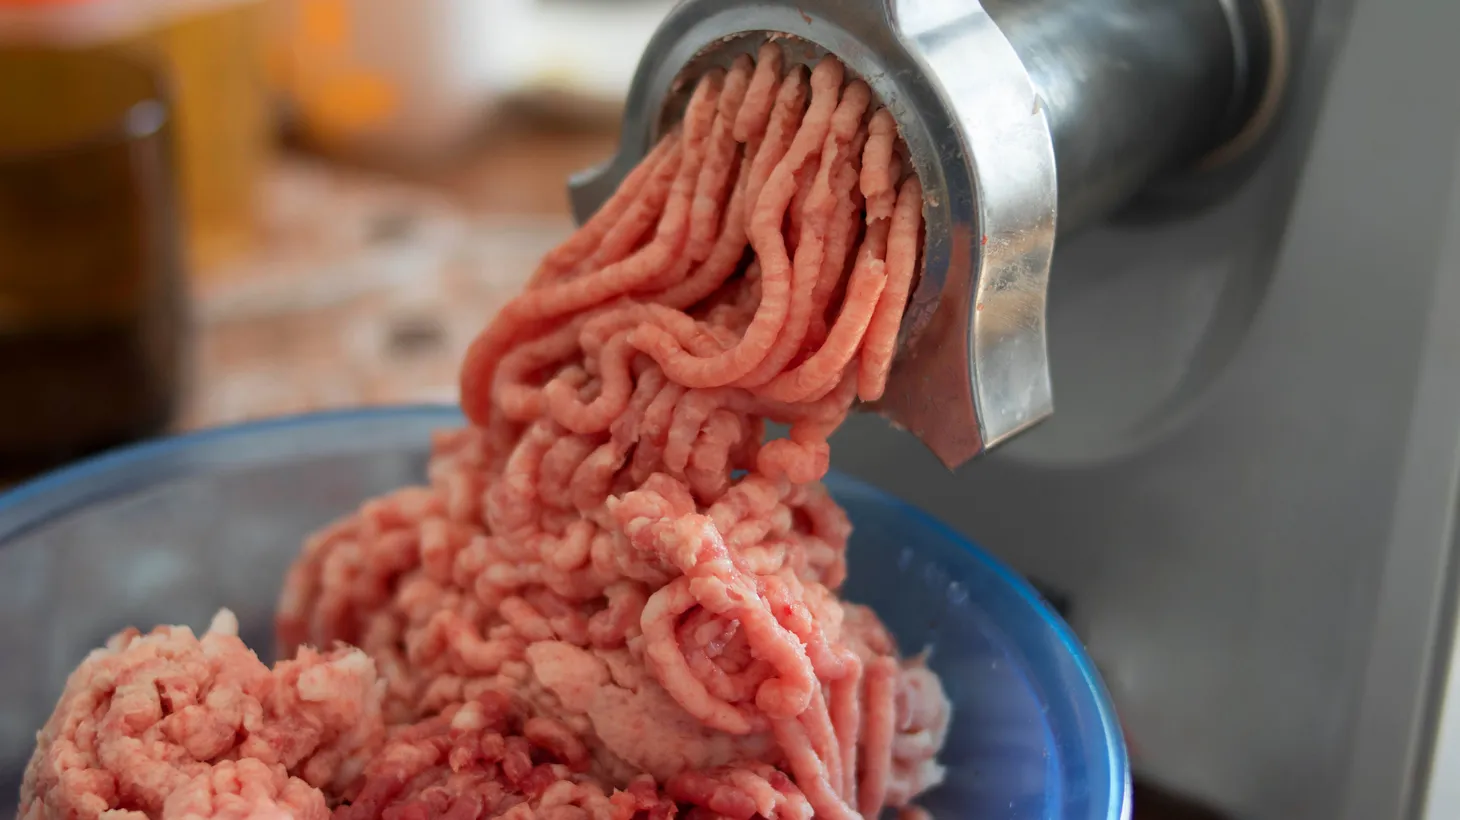 Americans love their ground meat, which happens to be the leading cause of food poisoning.